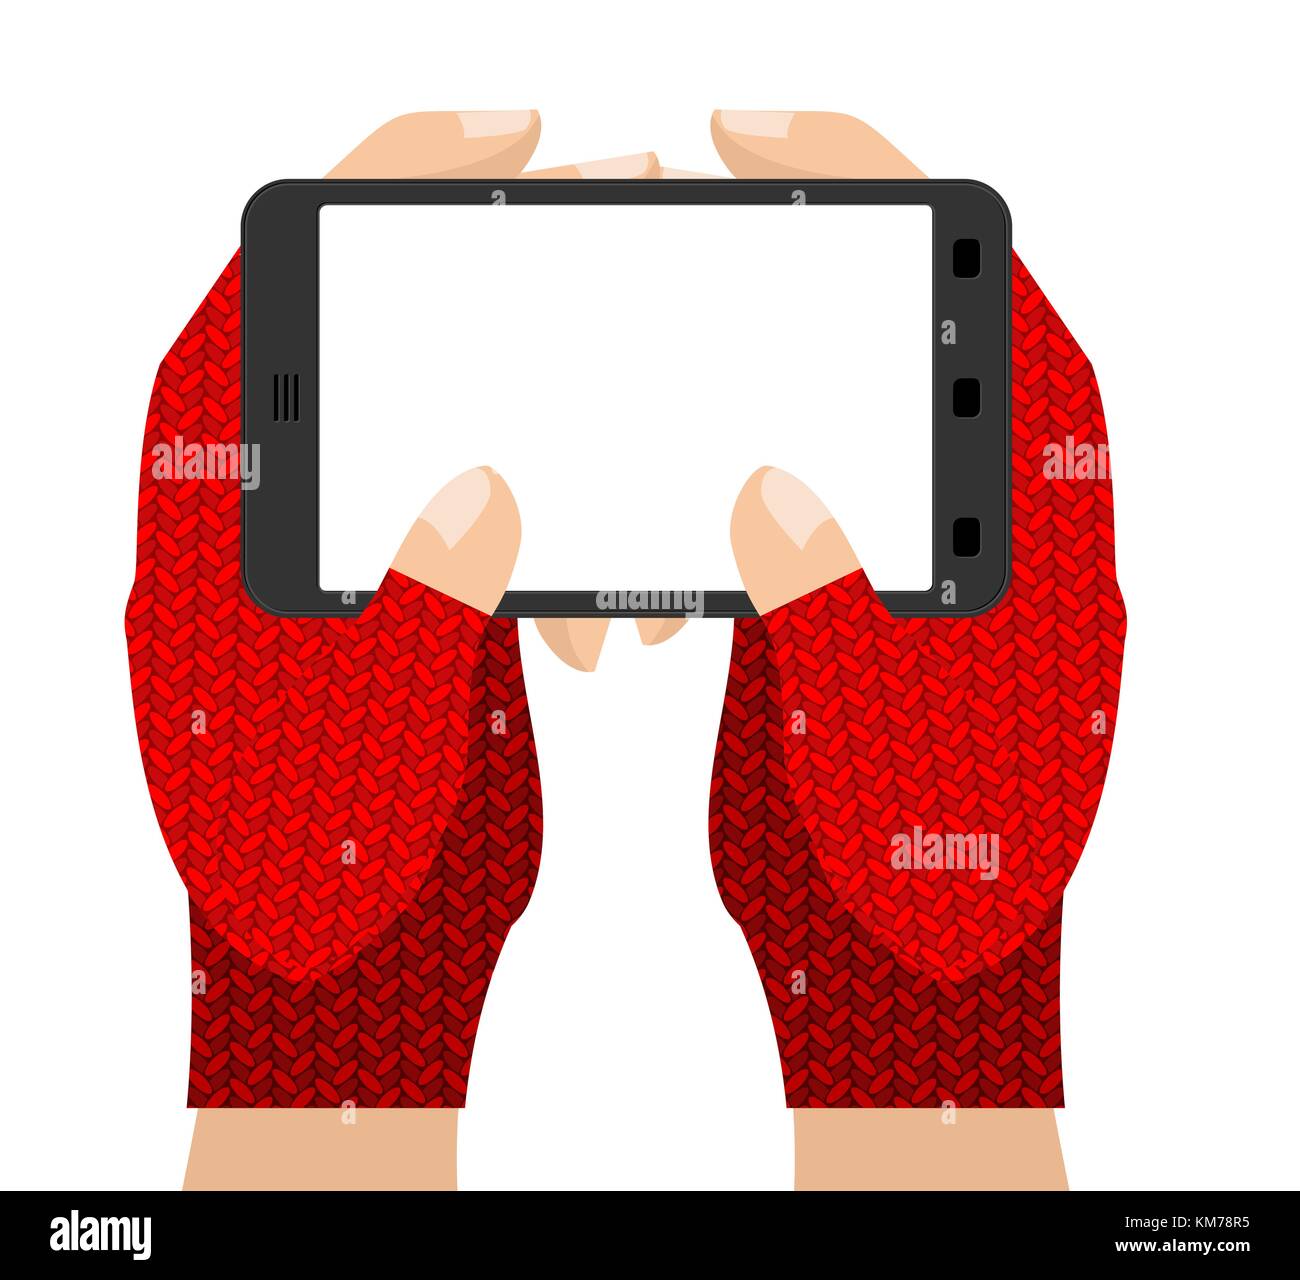 Hands in mittens hold phone. Winter gloves and gadget. Vector illustration Stock Vector